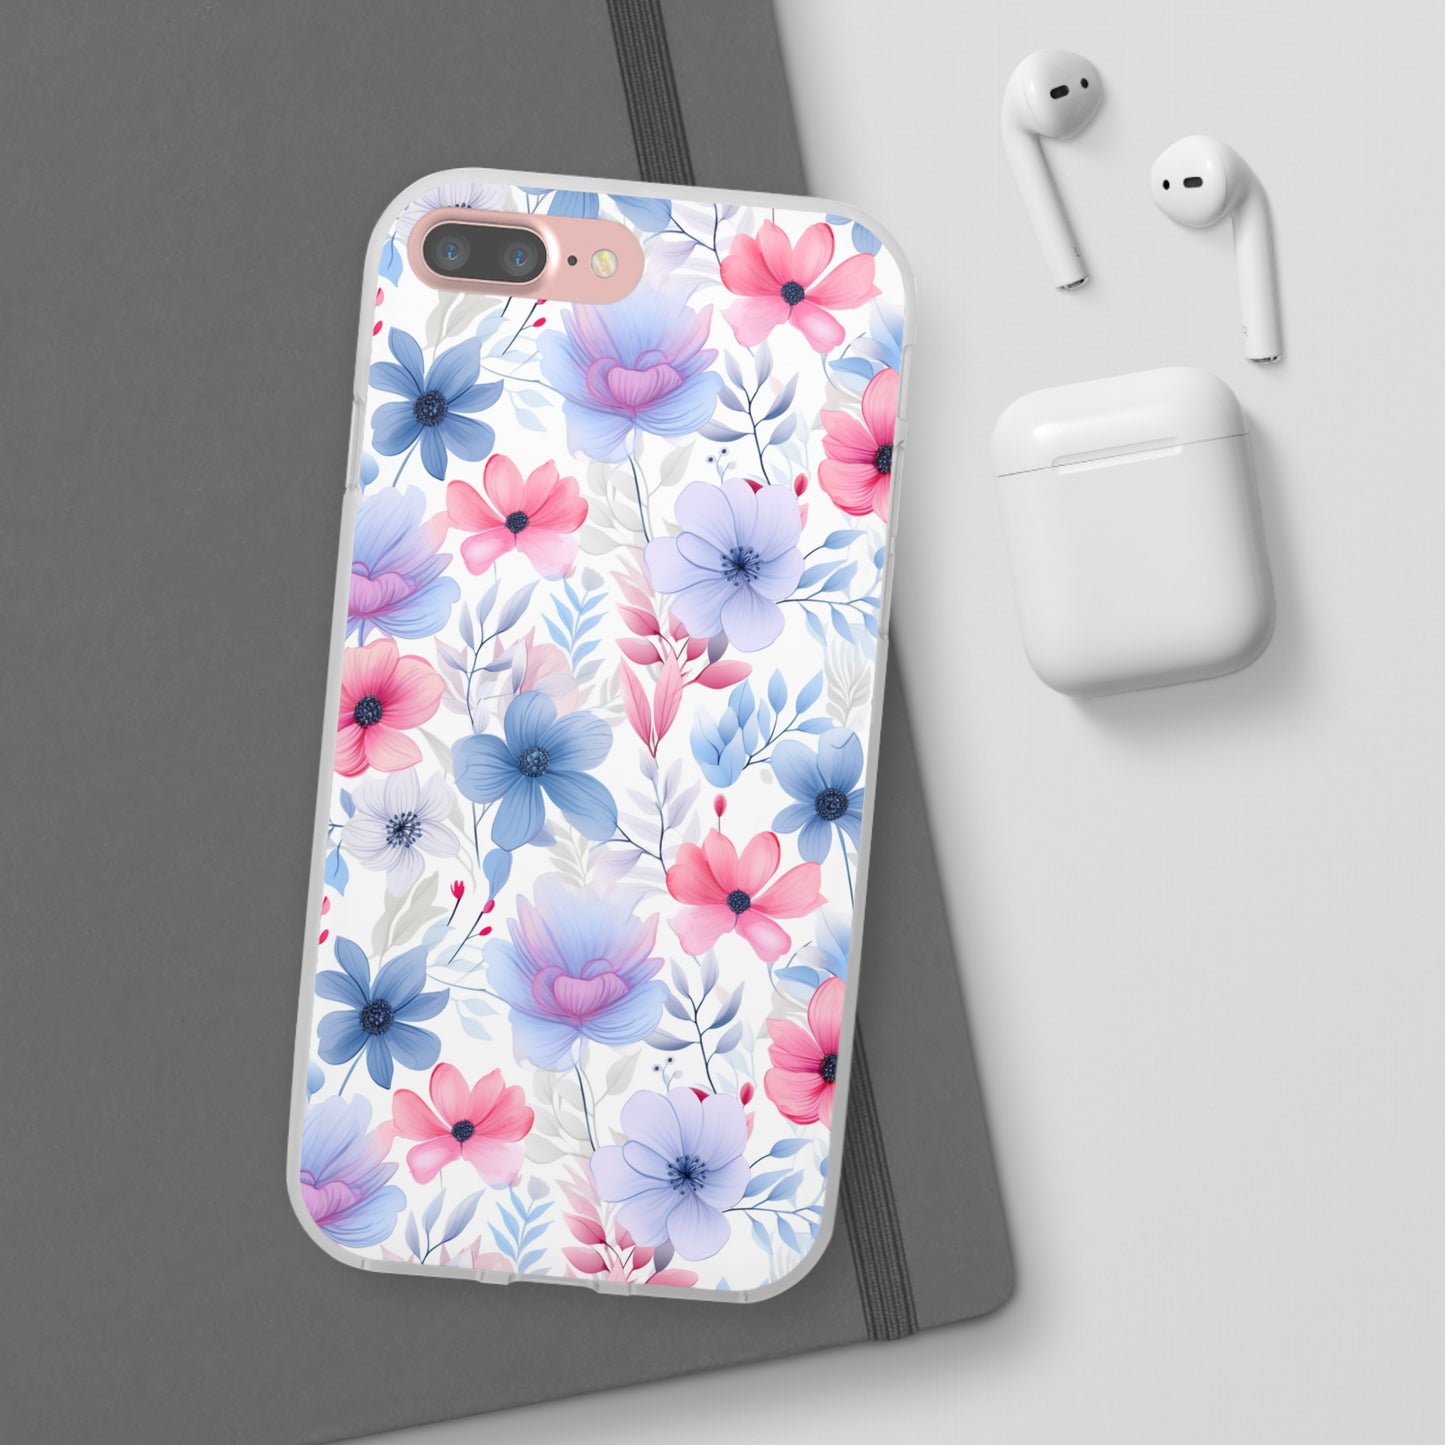 Floral Whispers - Soft Hues of Violets, Pinks, and Blues - Flexi Phone Case Phone Case Pattern Symphony iPhone 7 Plus with gift packaging  